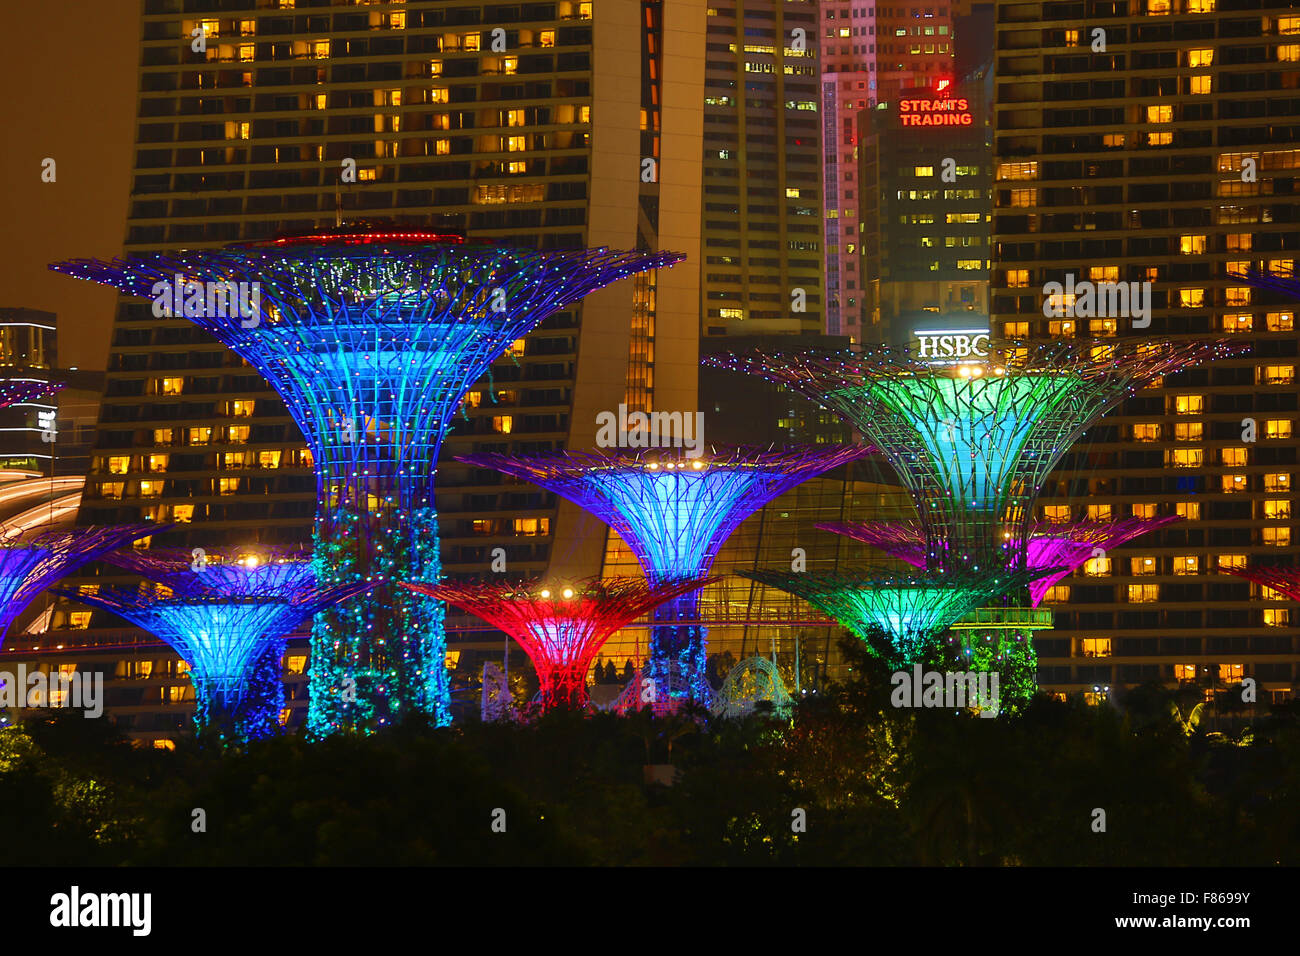 Night scene of the illuminated Supertrees in the Supertrees Grove in the Gardens by the Bay, Singapore, Republic of Singapore Stock Photo